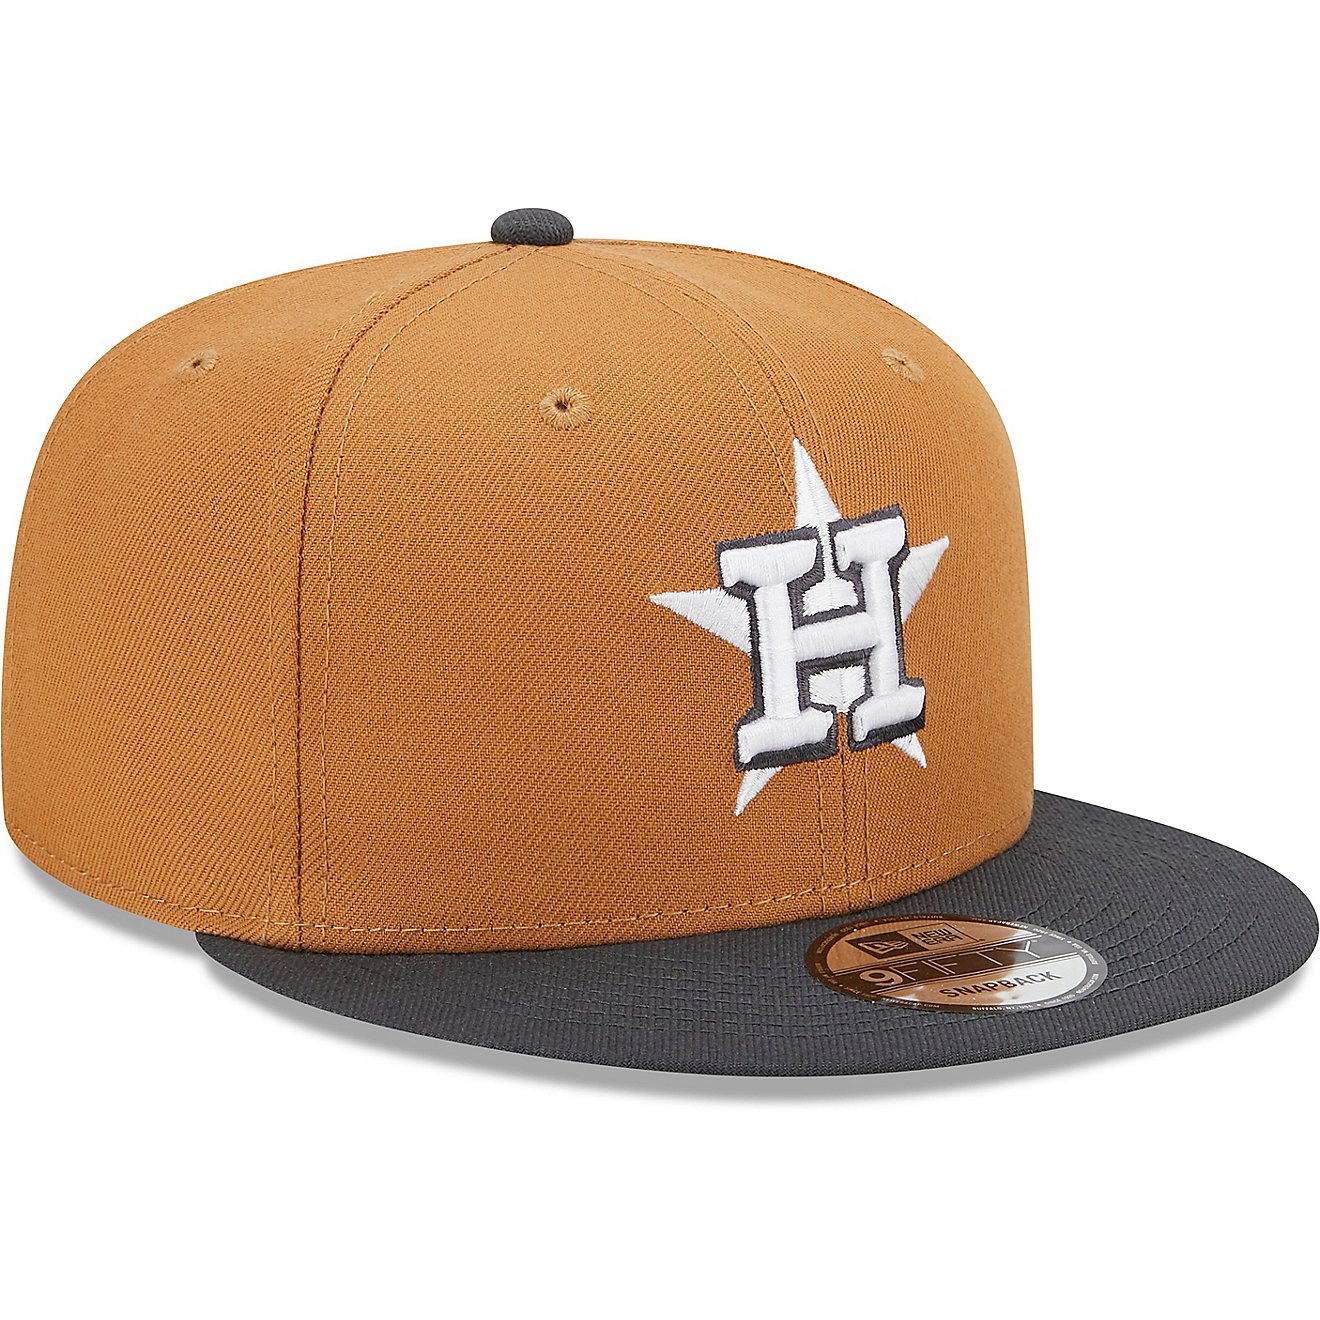 New Era Men's Houston Astros 2-Tone Pack 9FIFTY Cap                                                                              - view number 3